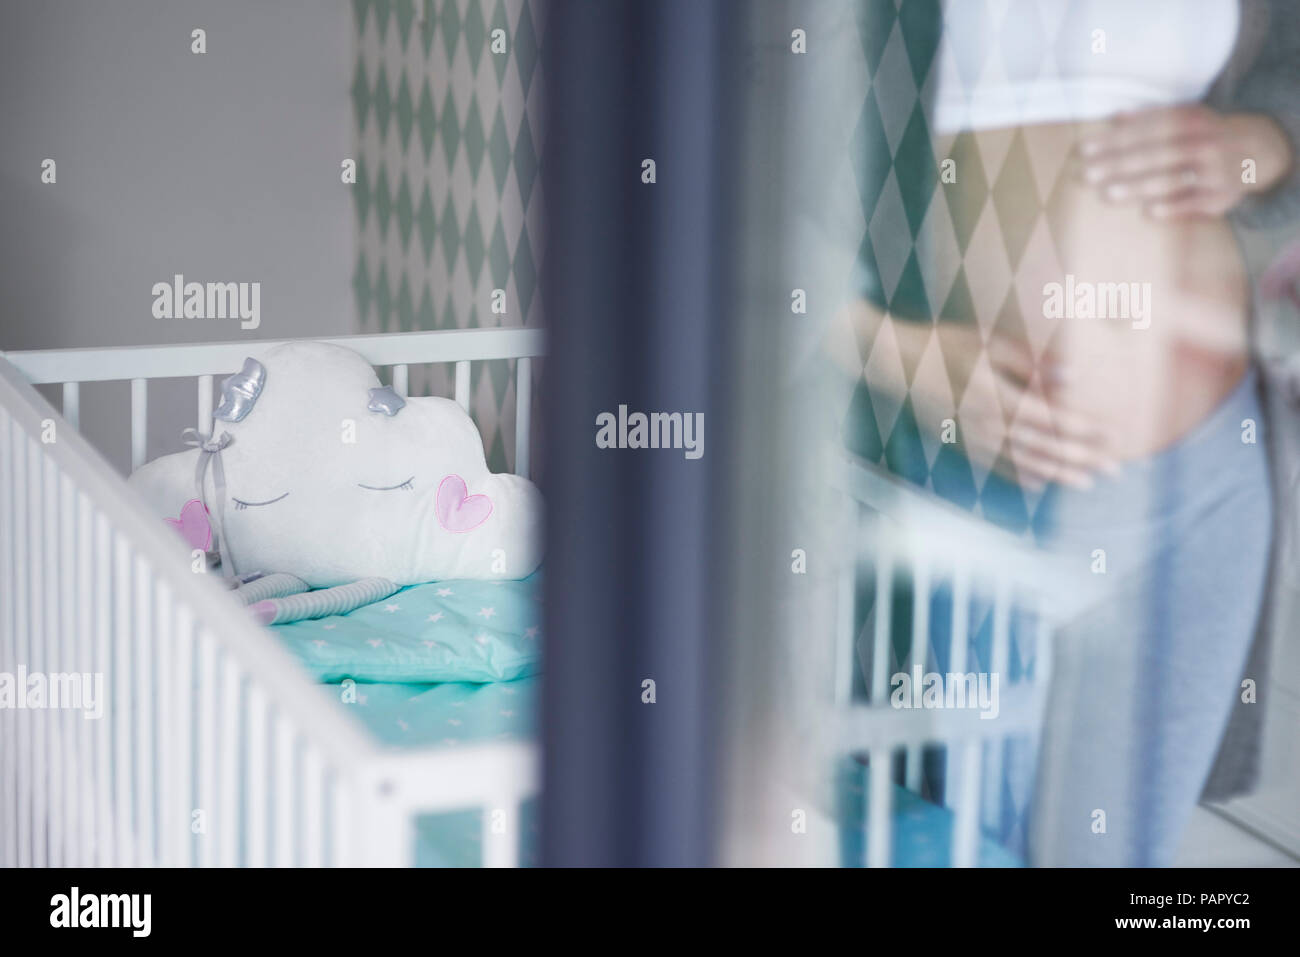 Mirrored pregnant woman, baby bed in the background Stock Photo